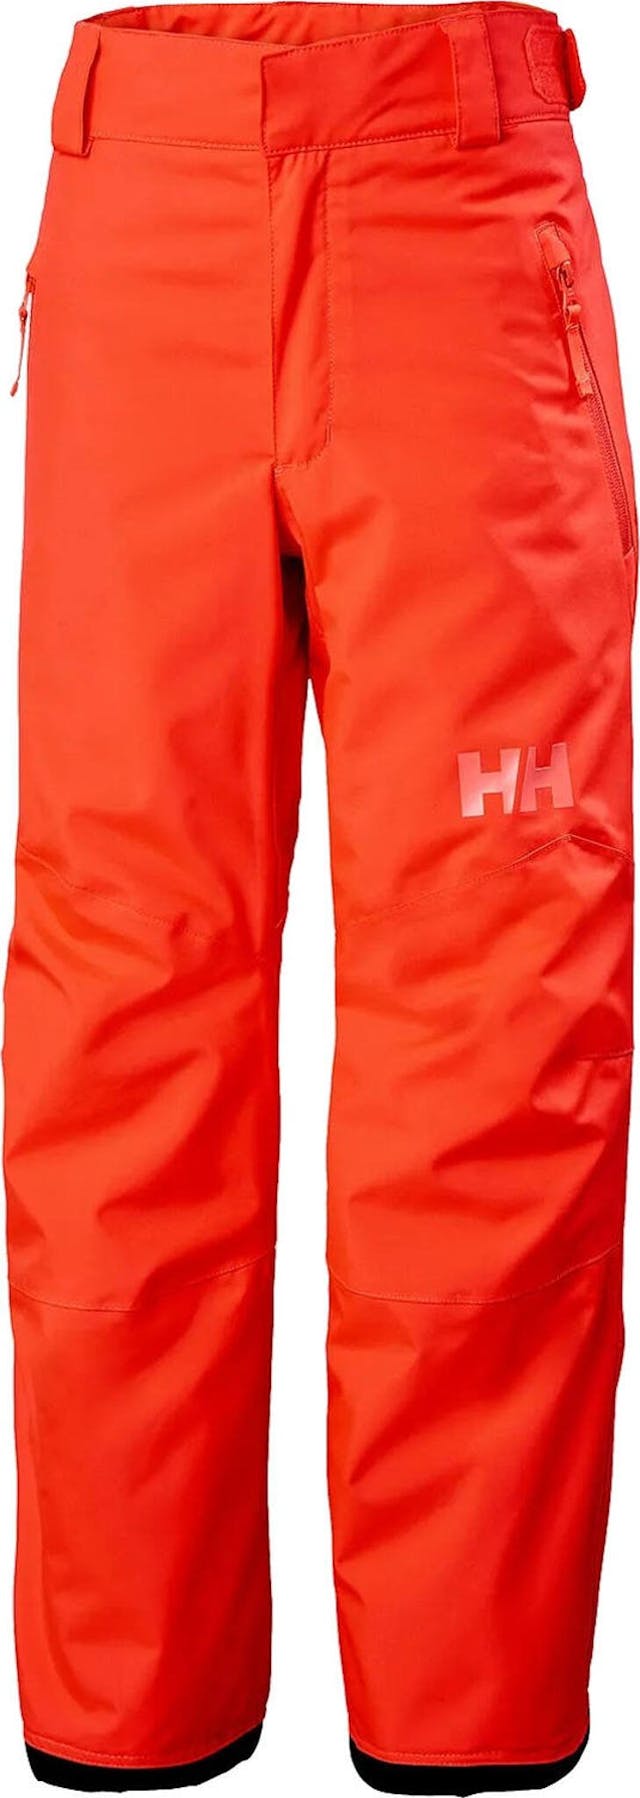 Product image for Legendary Pant - Youth